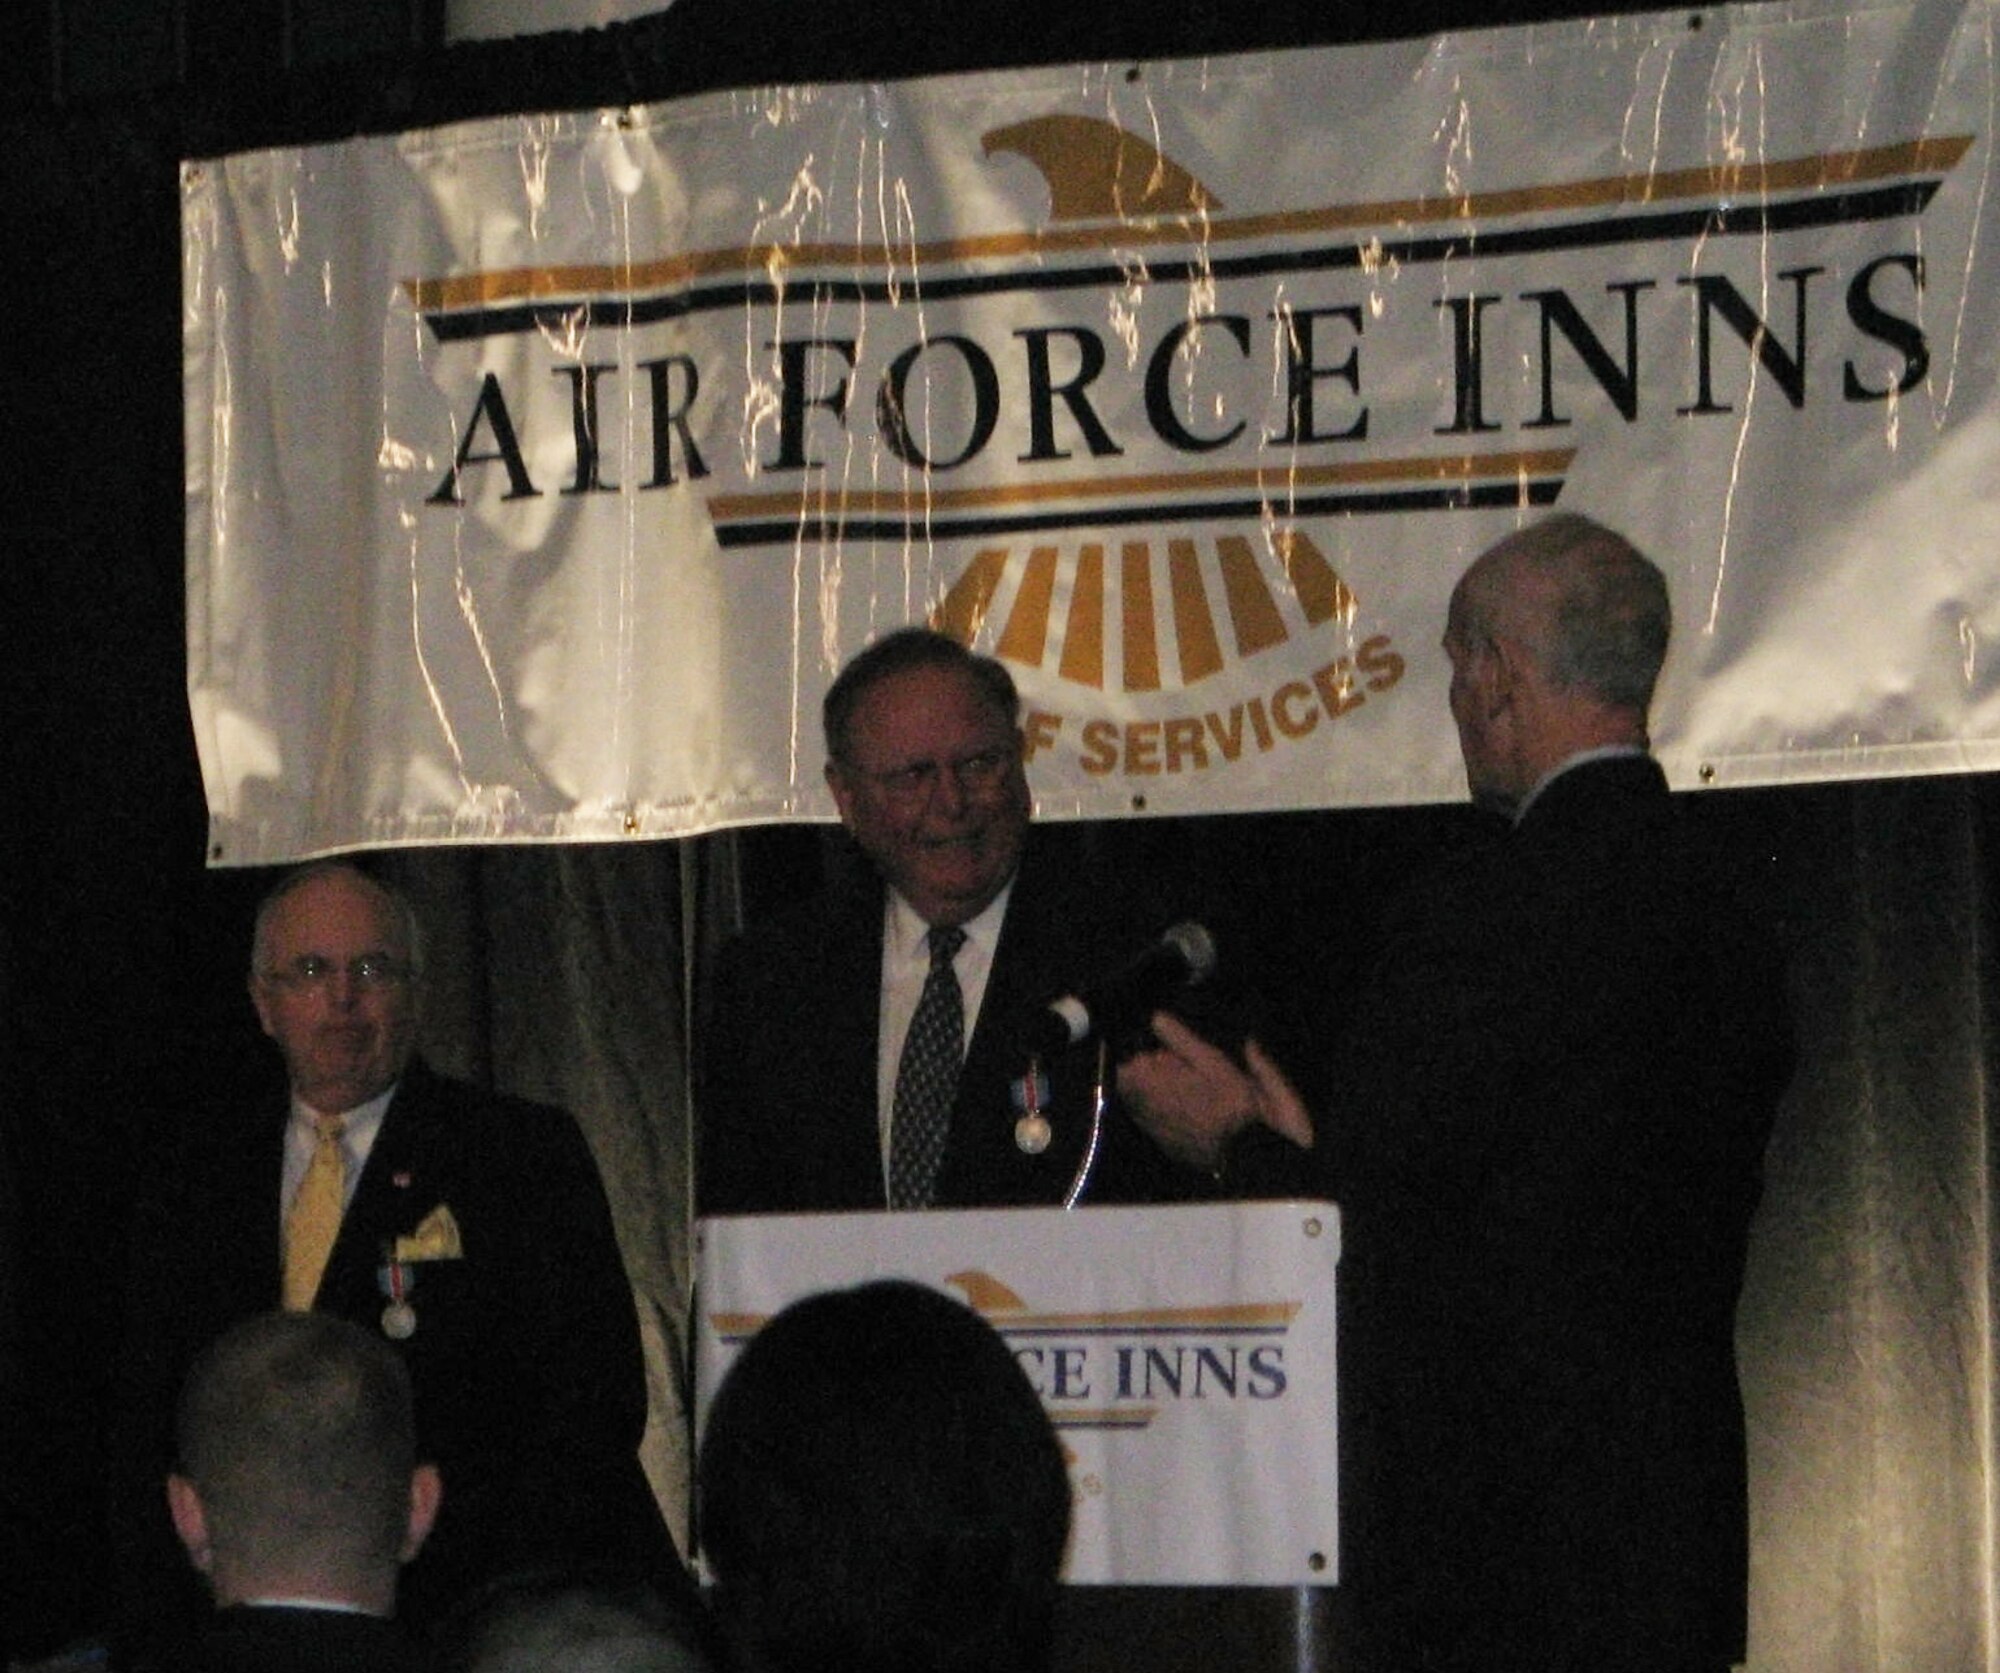 Art Myers, Air Force Services director, speaks after presenting the Commander's Award for Public Serivce to Joseph McInerney and Joseph Spinnato during the annual Air Force Innkeeper Awards, November 2008, at the International Hotel/Motel Restaurant Show, New York City, NY. Mr. McInerney is president and chief executive officer of the American Hotel & Lodging Association and Mr. Spinnato is president and CEO of the Hotel Association of New York City, Inc. (Photo courtesy of Military Club & Hospitality)